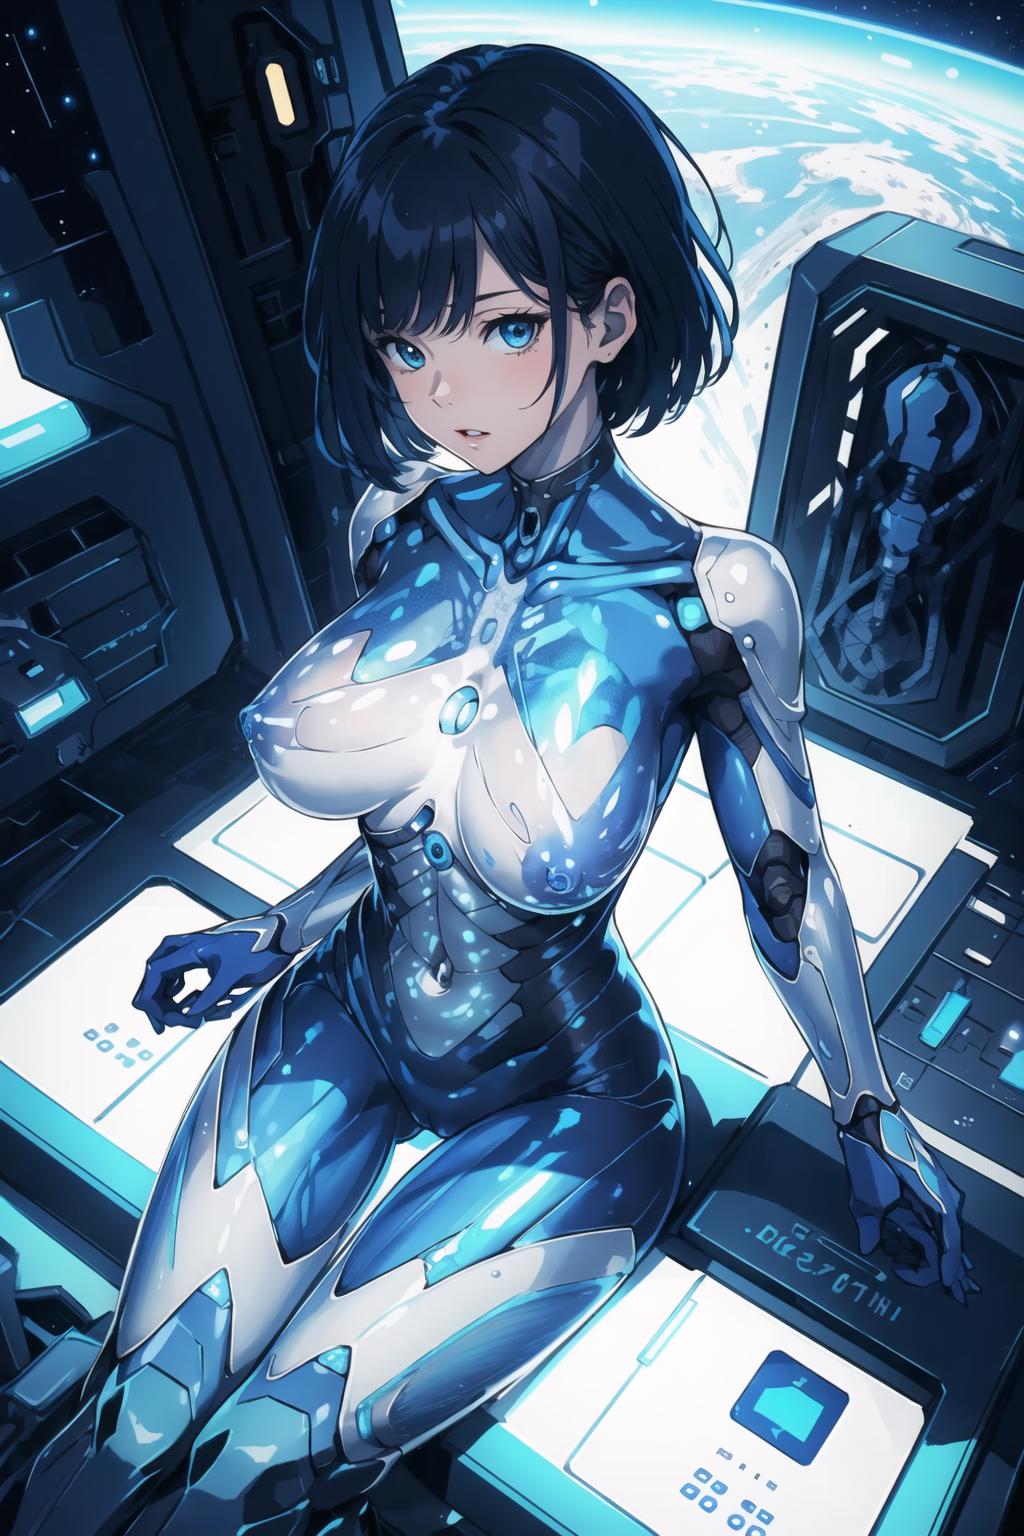 A blue and white character with large breasts posing in a futuristic setting.